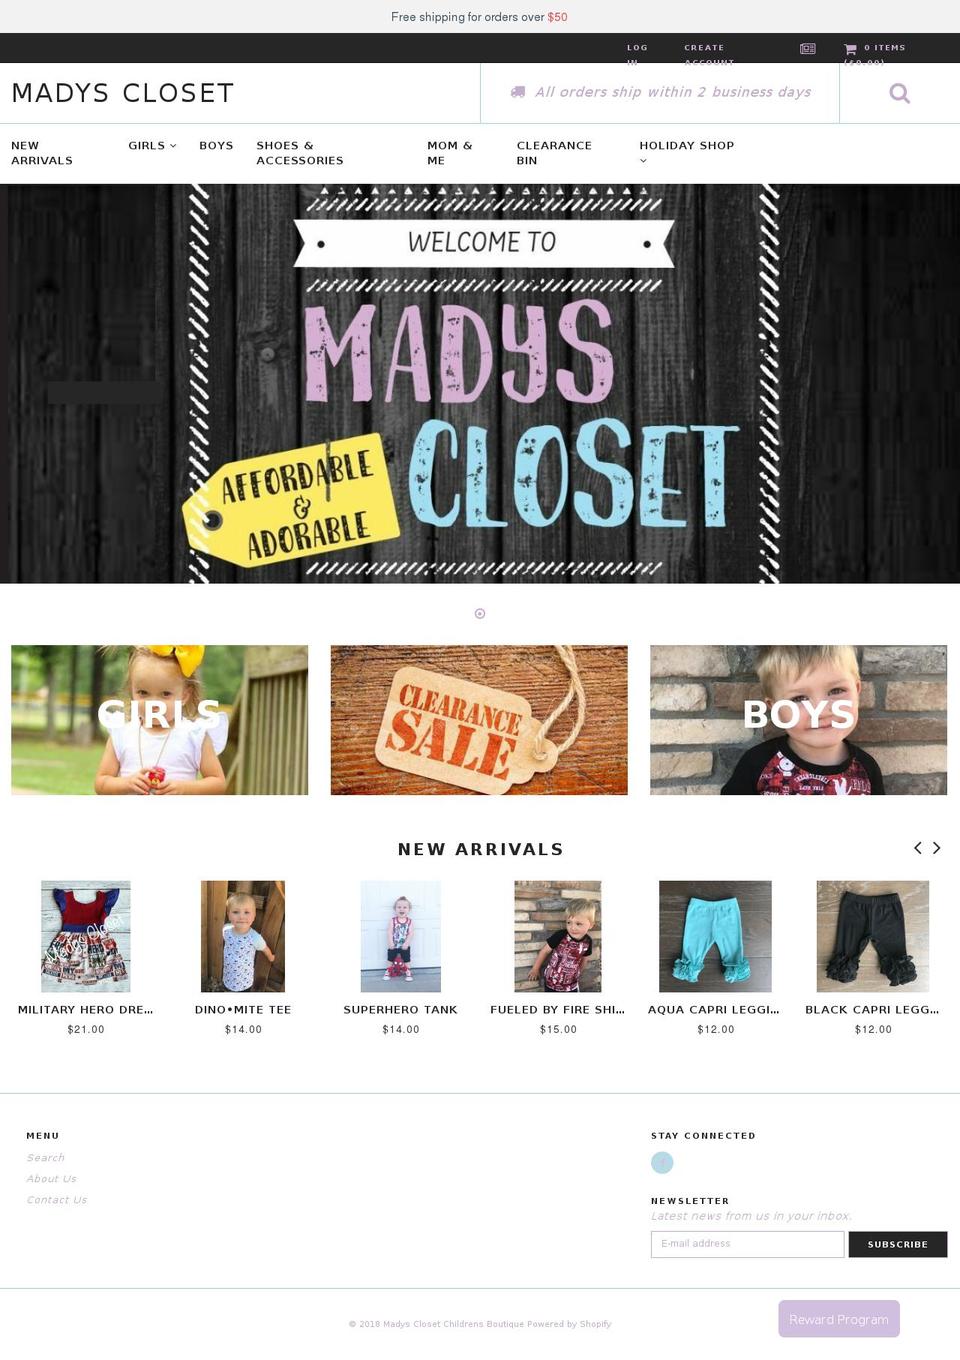 annabelle-v1-2 Shopify theme site example madyscloset.com